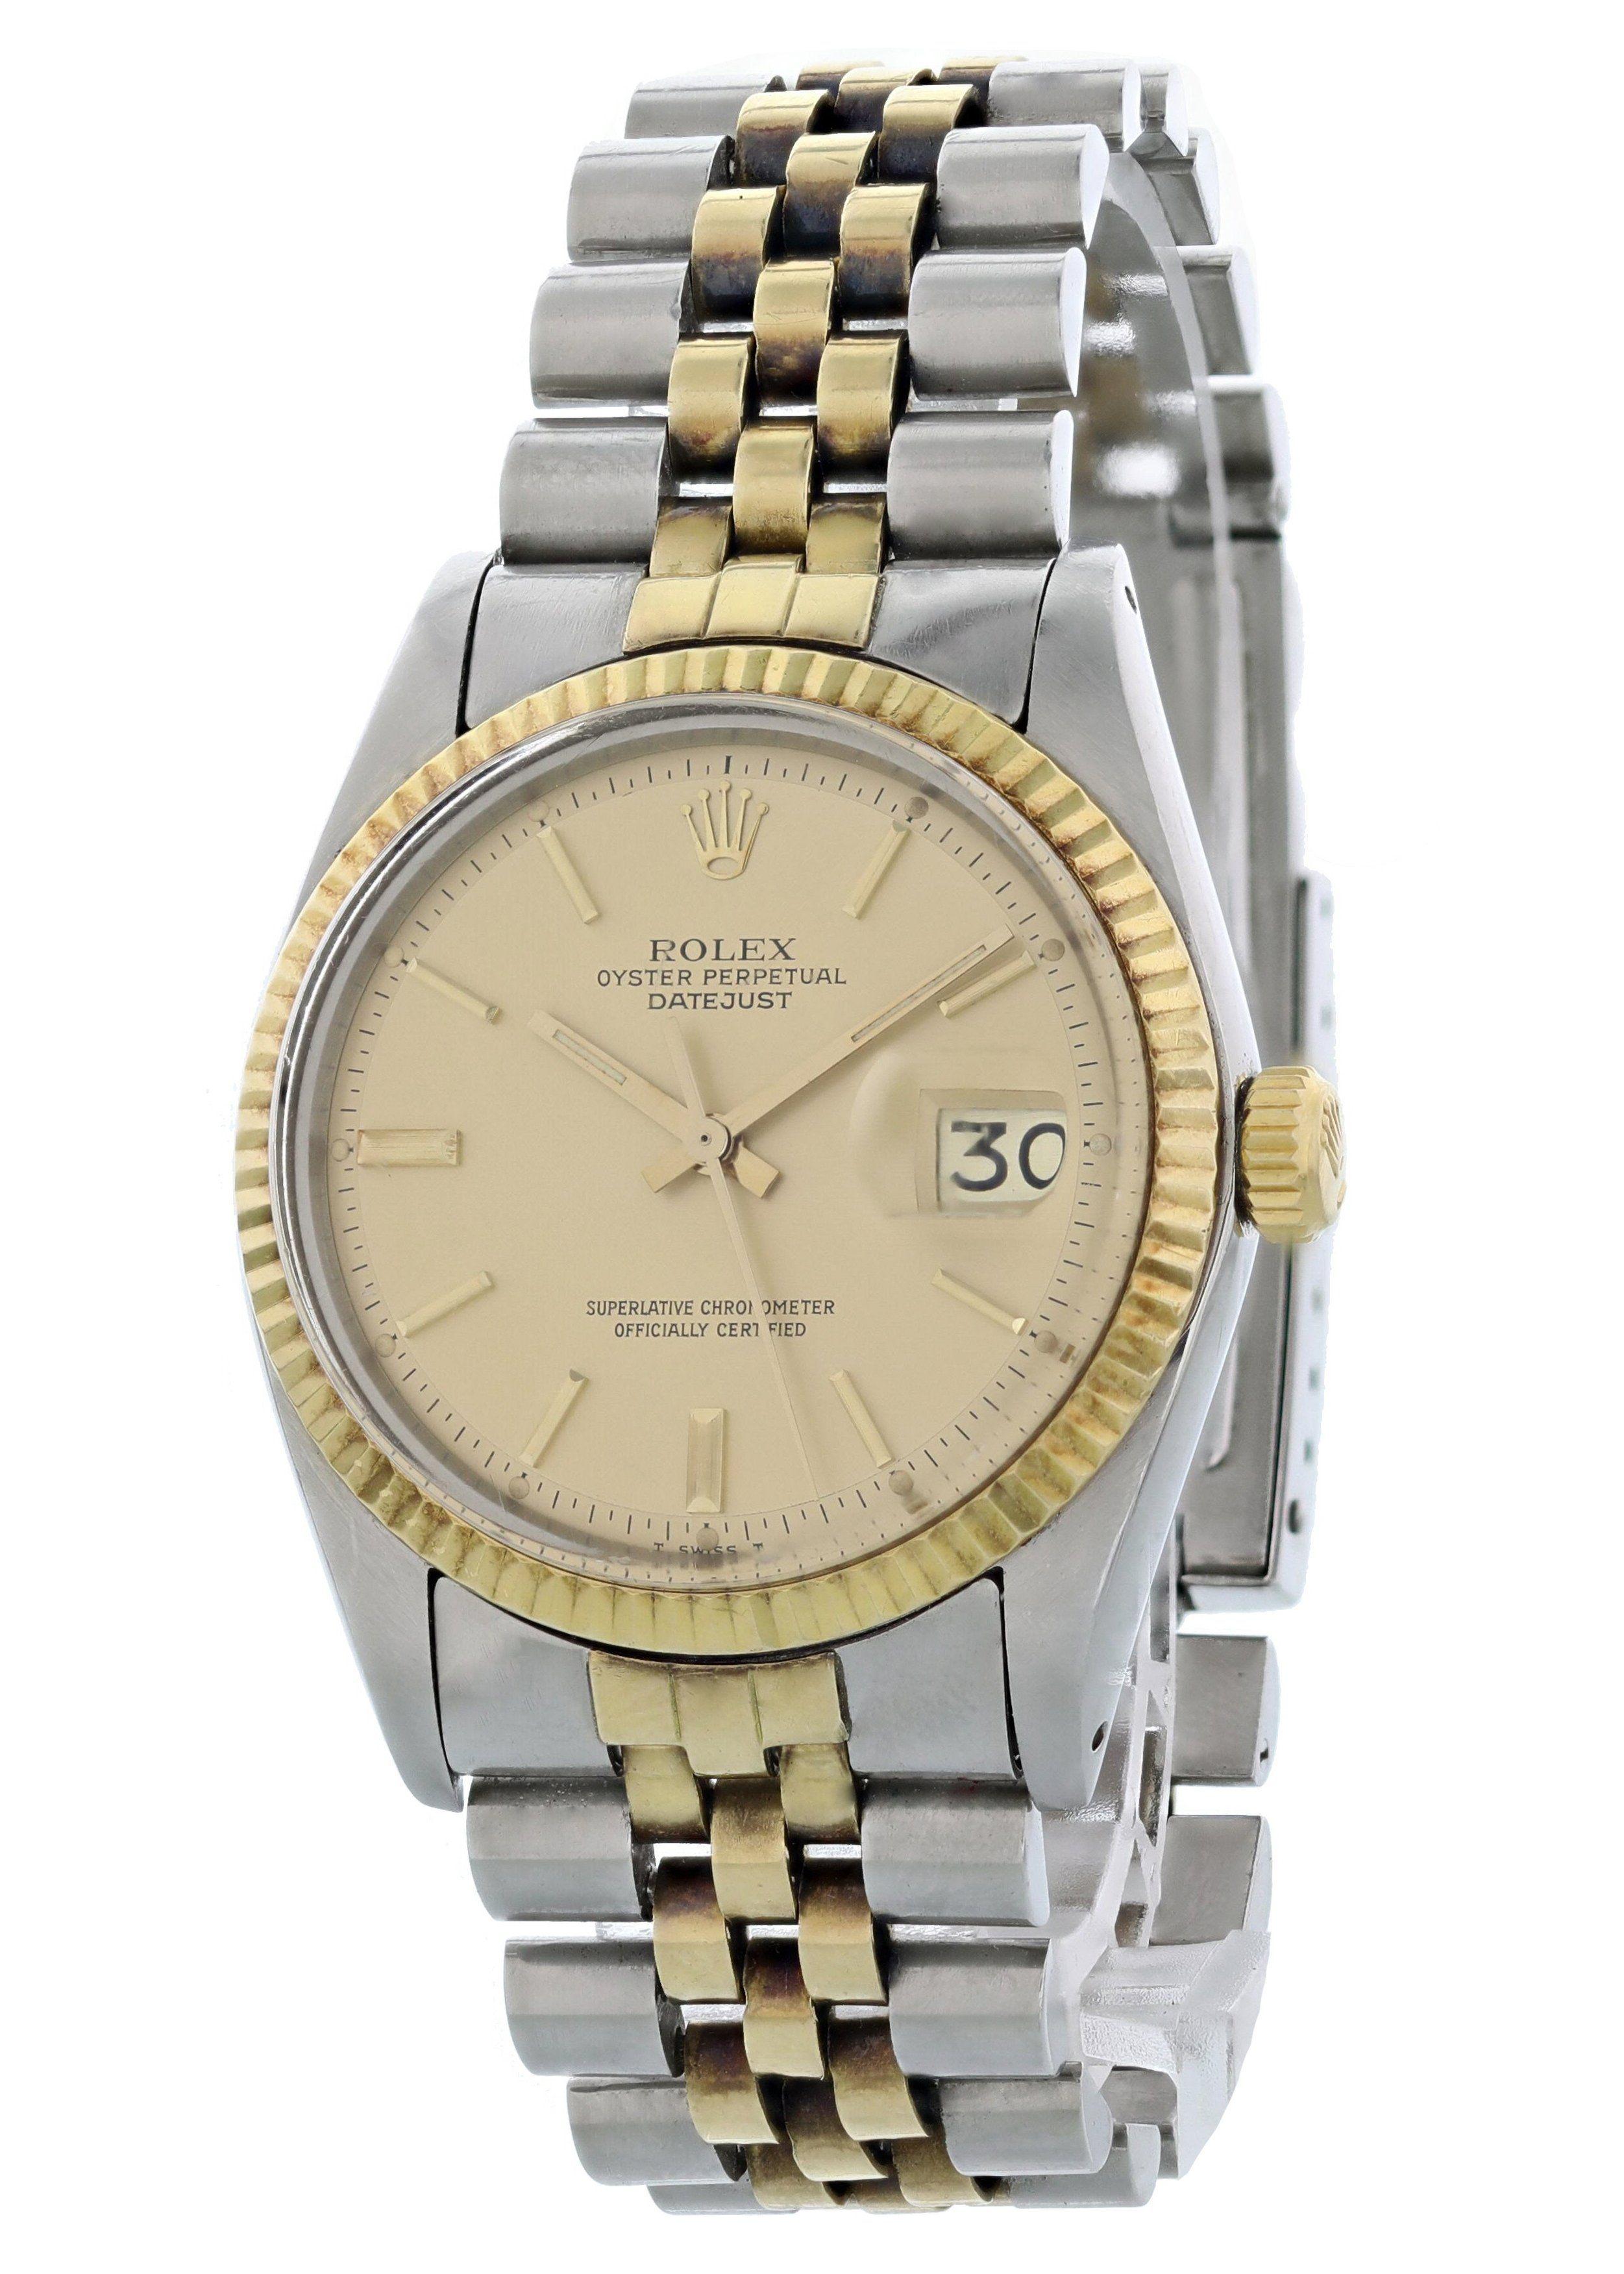 Rolex Oyster Perpetual Datejust 1601 Men's Watch. Stainless steel 36mm case with an 18k white gold fluted bezel. champagne dial with gold hands and index markers. Date display at 3 o'clock position with quickset function. Stainless steel jubilee